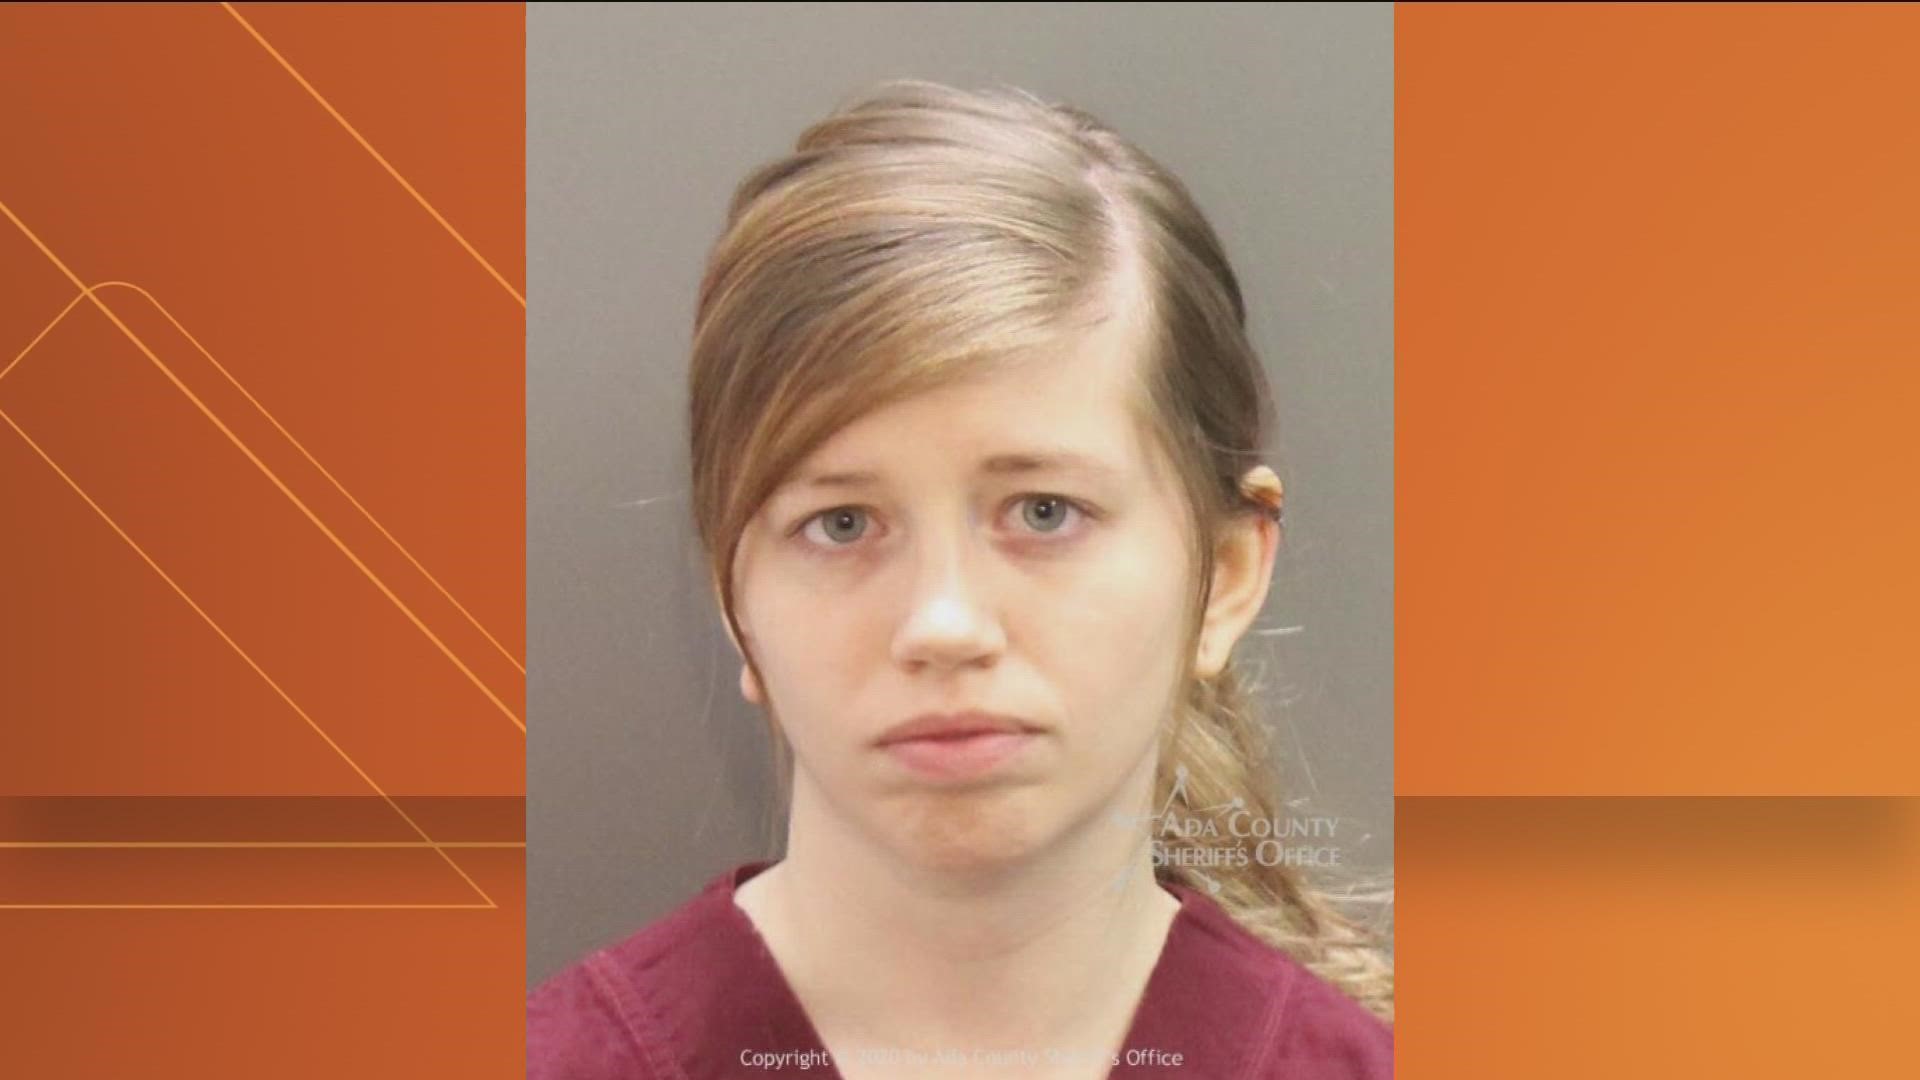 28-year-old Danielle Radue was sentenced to at least 18 years of prison for the murder of her son in 2020.